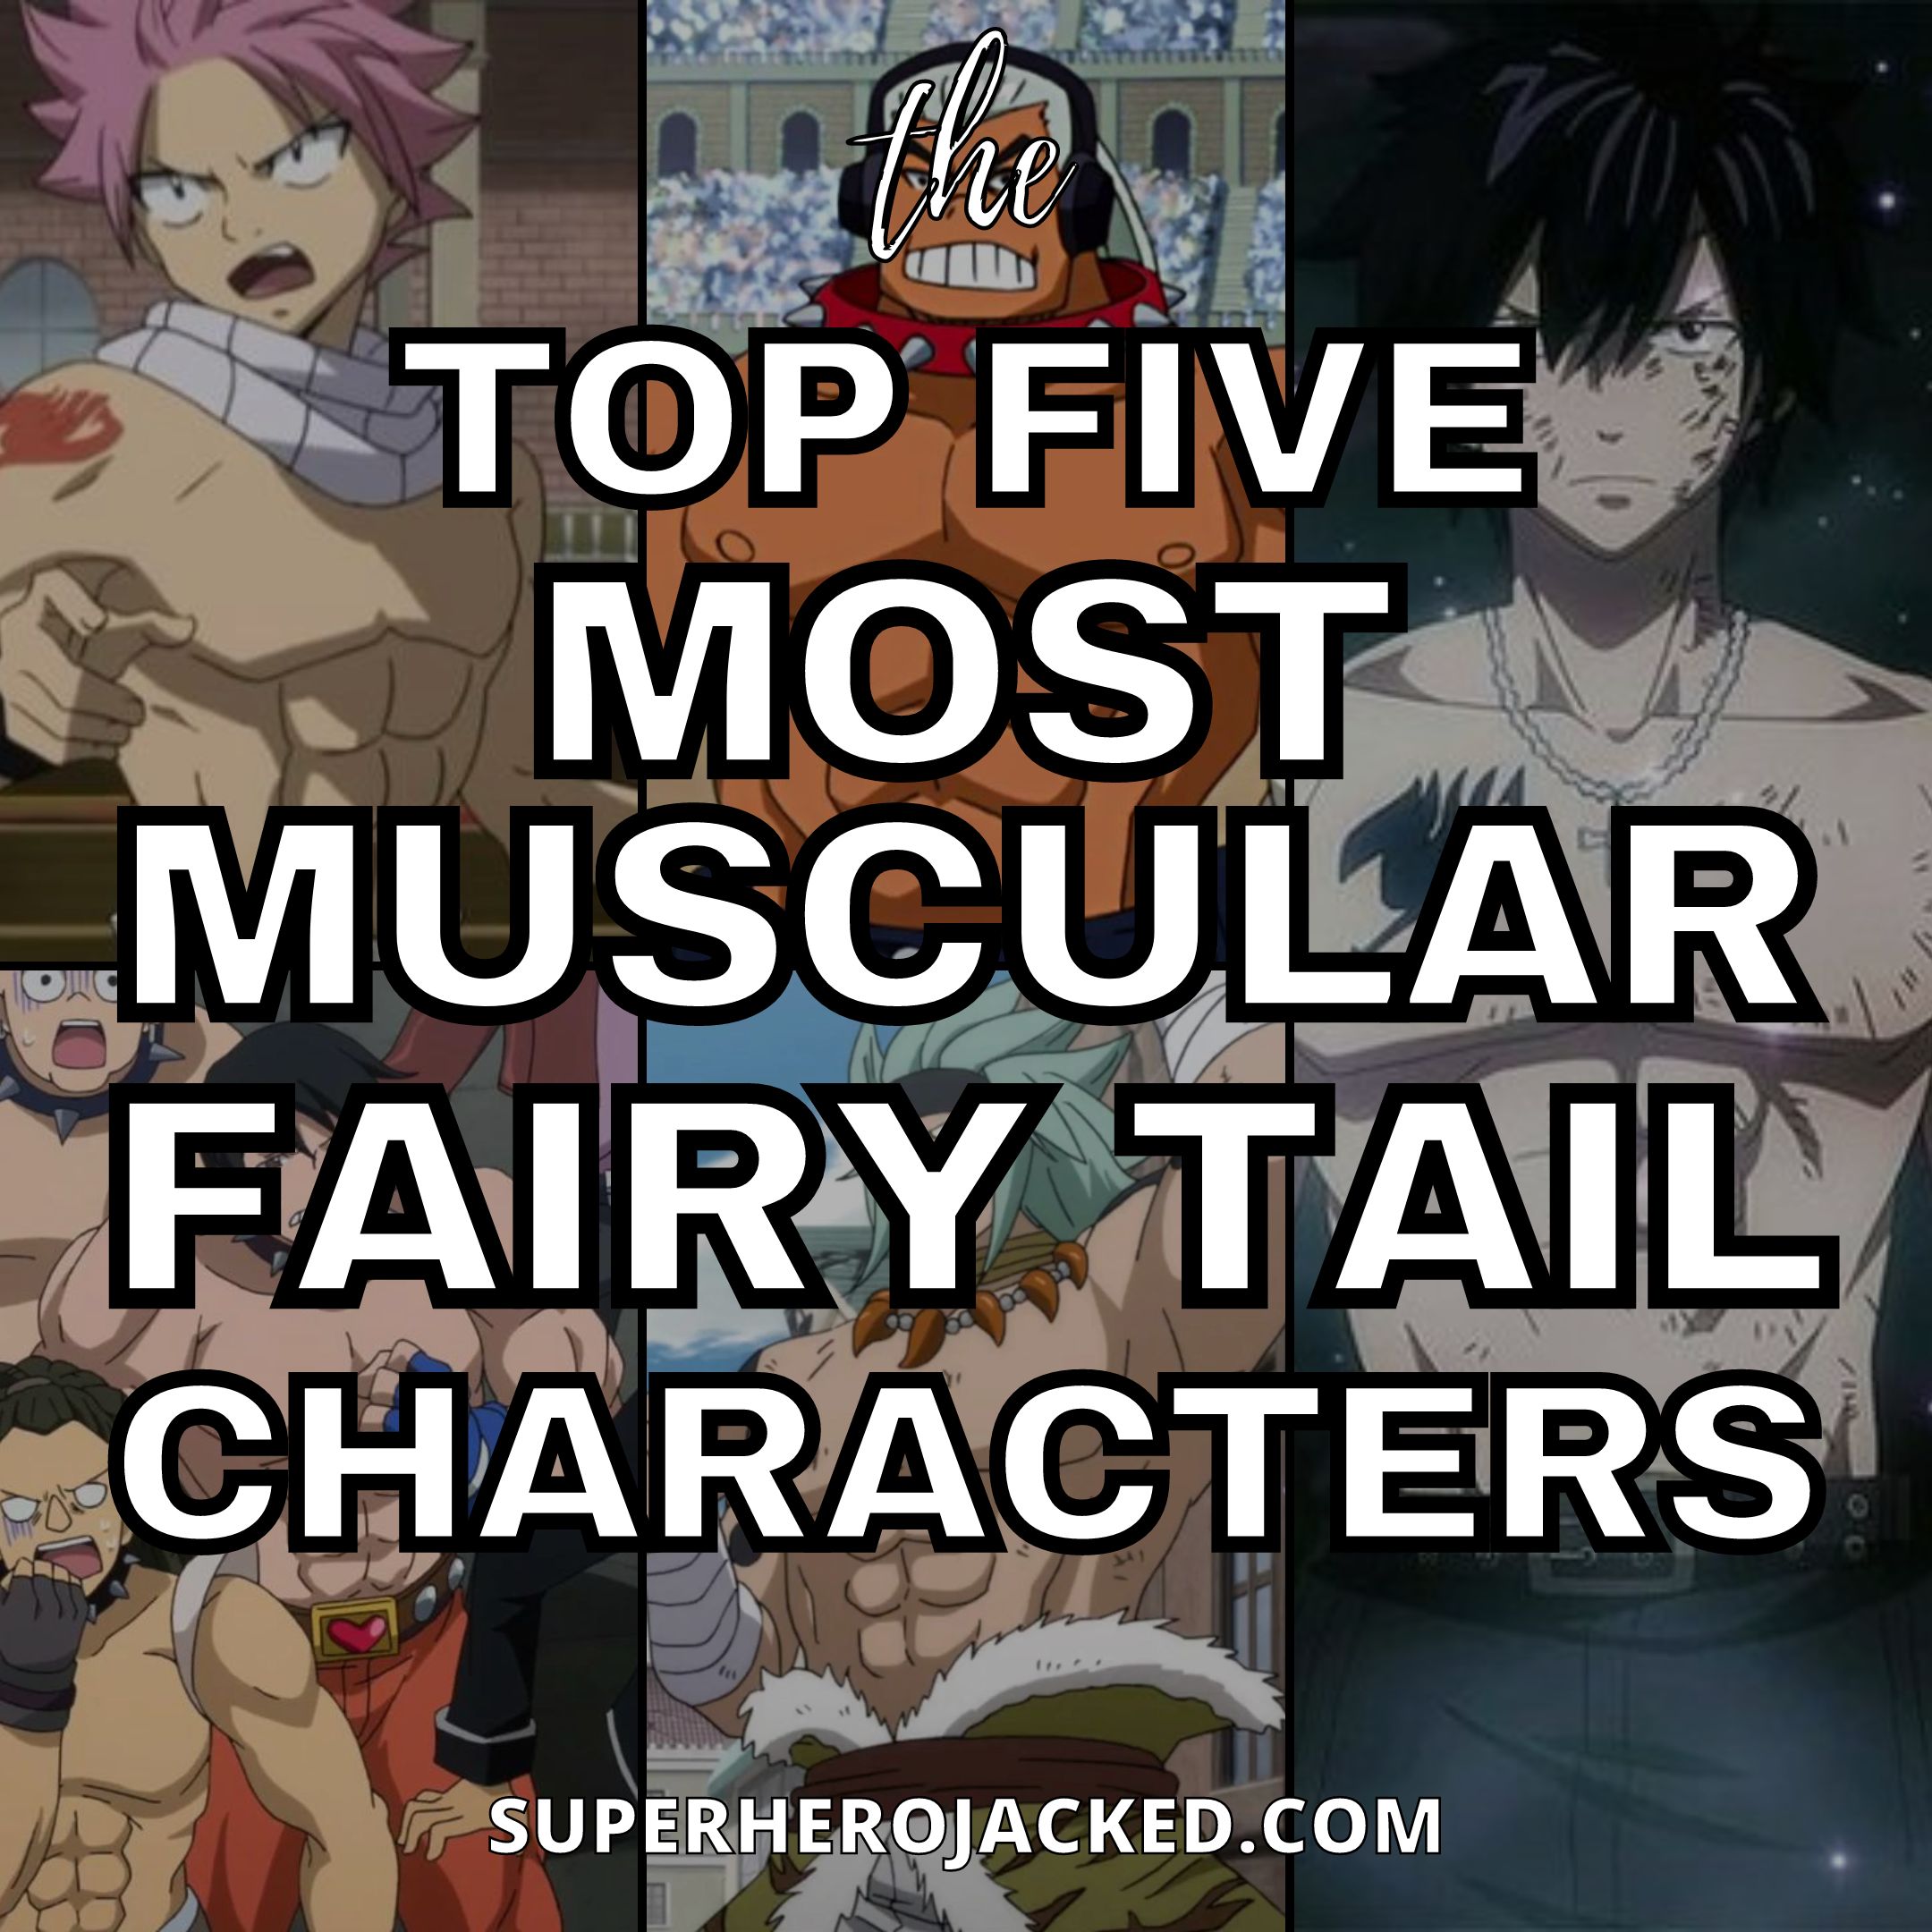 The Top Five Most Muscular Fairy Tail Characters